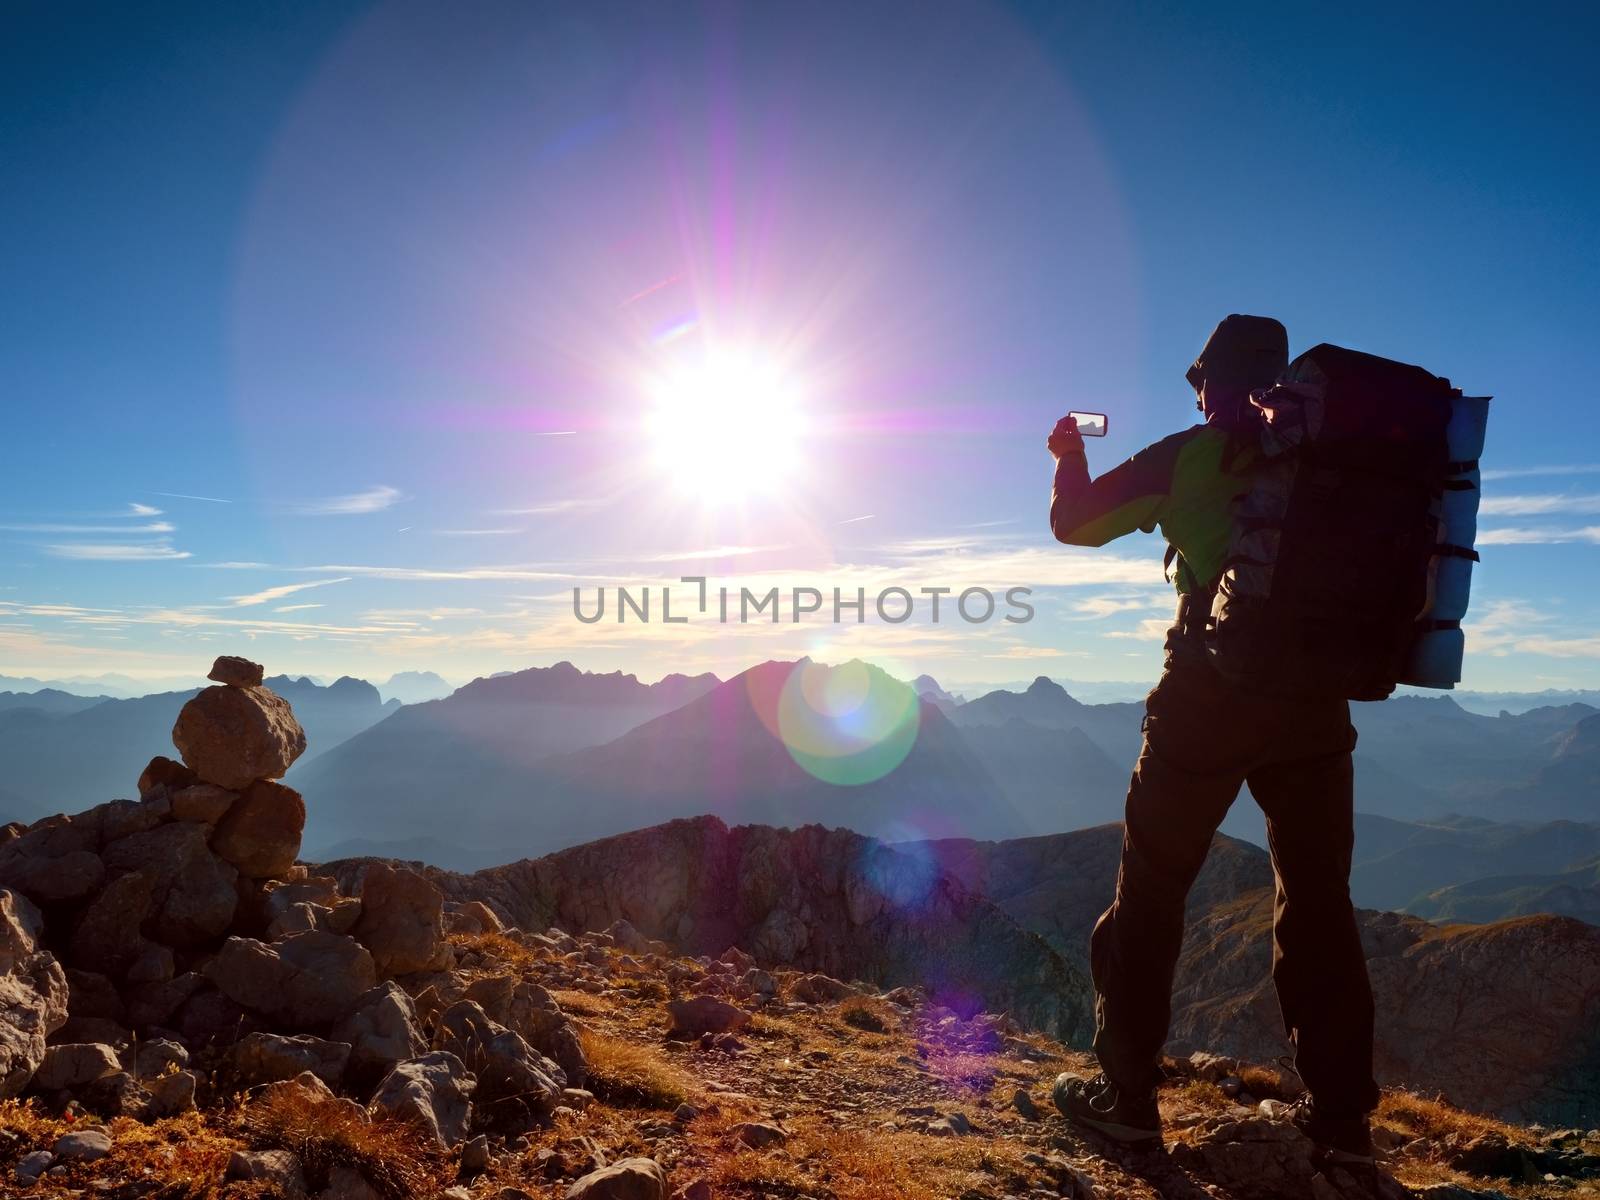 Lens flare defect.  Tourist guide on Alps peak takes photo. Strong hiker with big backpack   by rdonar2